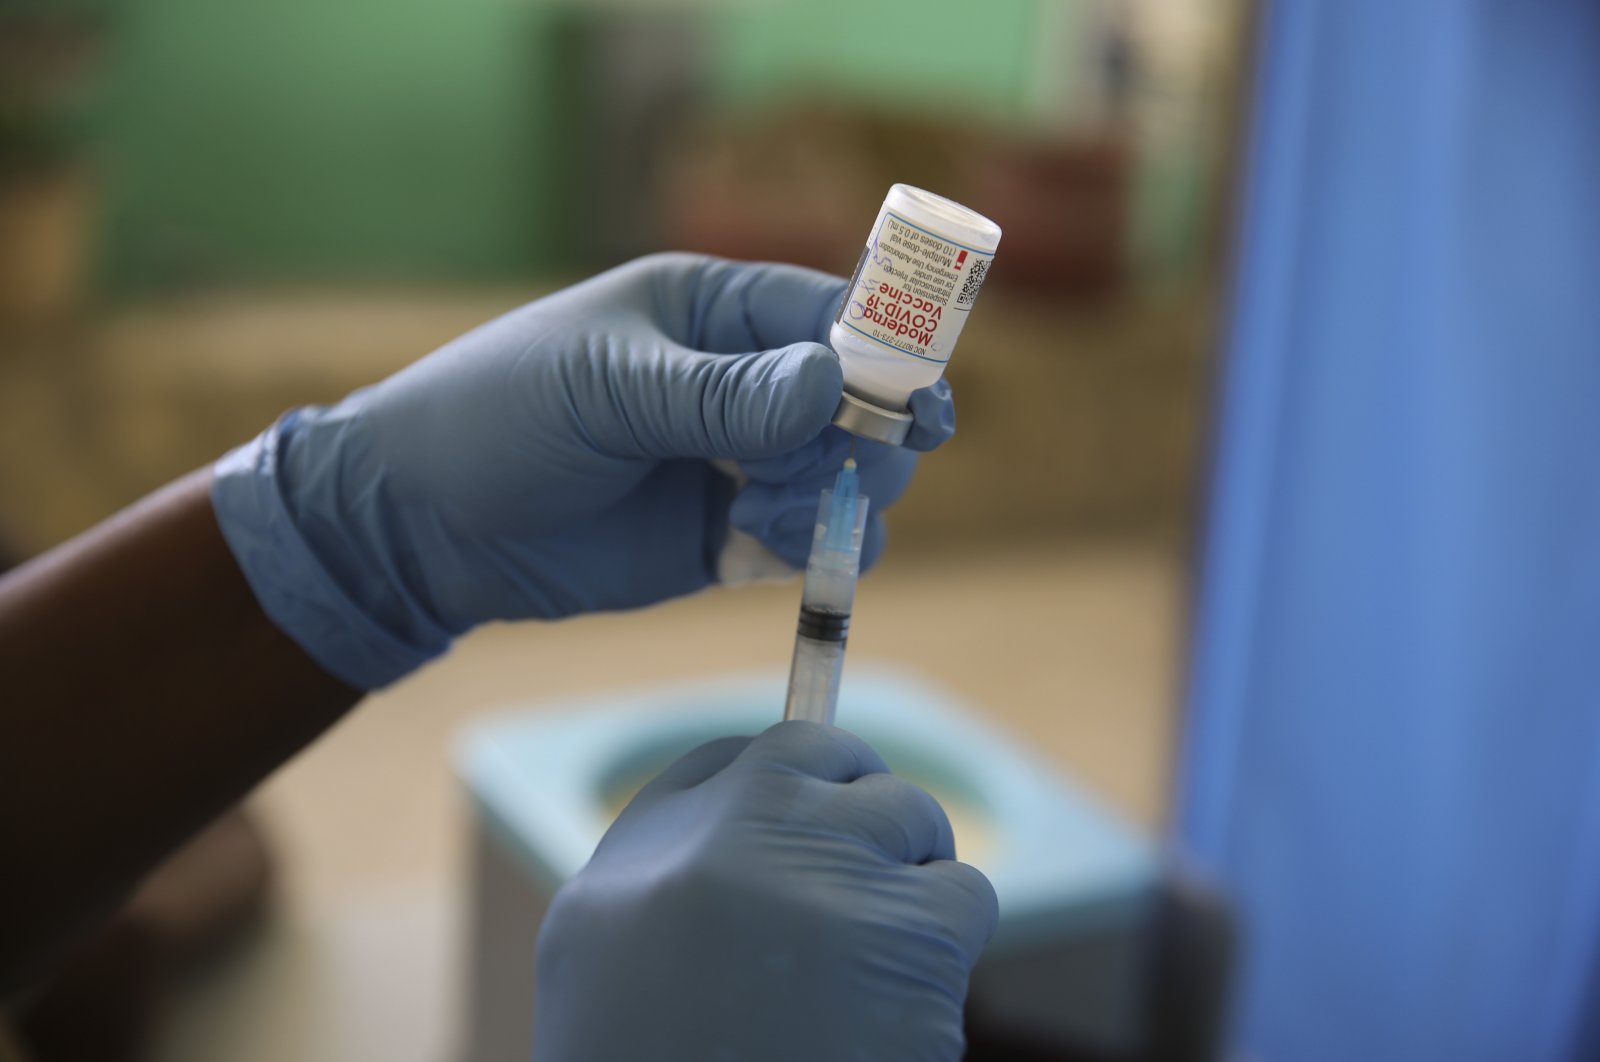 A medical worker prepares a shot of the Moderna vaccine during a vaccination campaign at Saint Damien Hospital in Port-au-Prince, Haiti, July 27, 2021. (AP Photo)